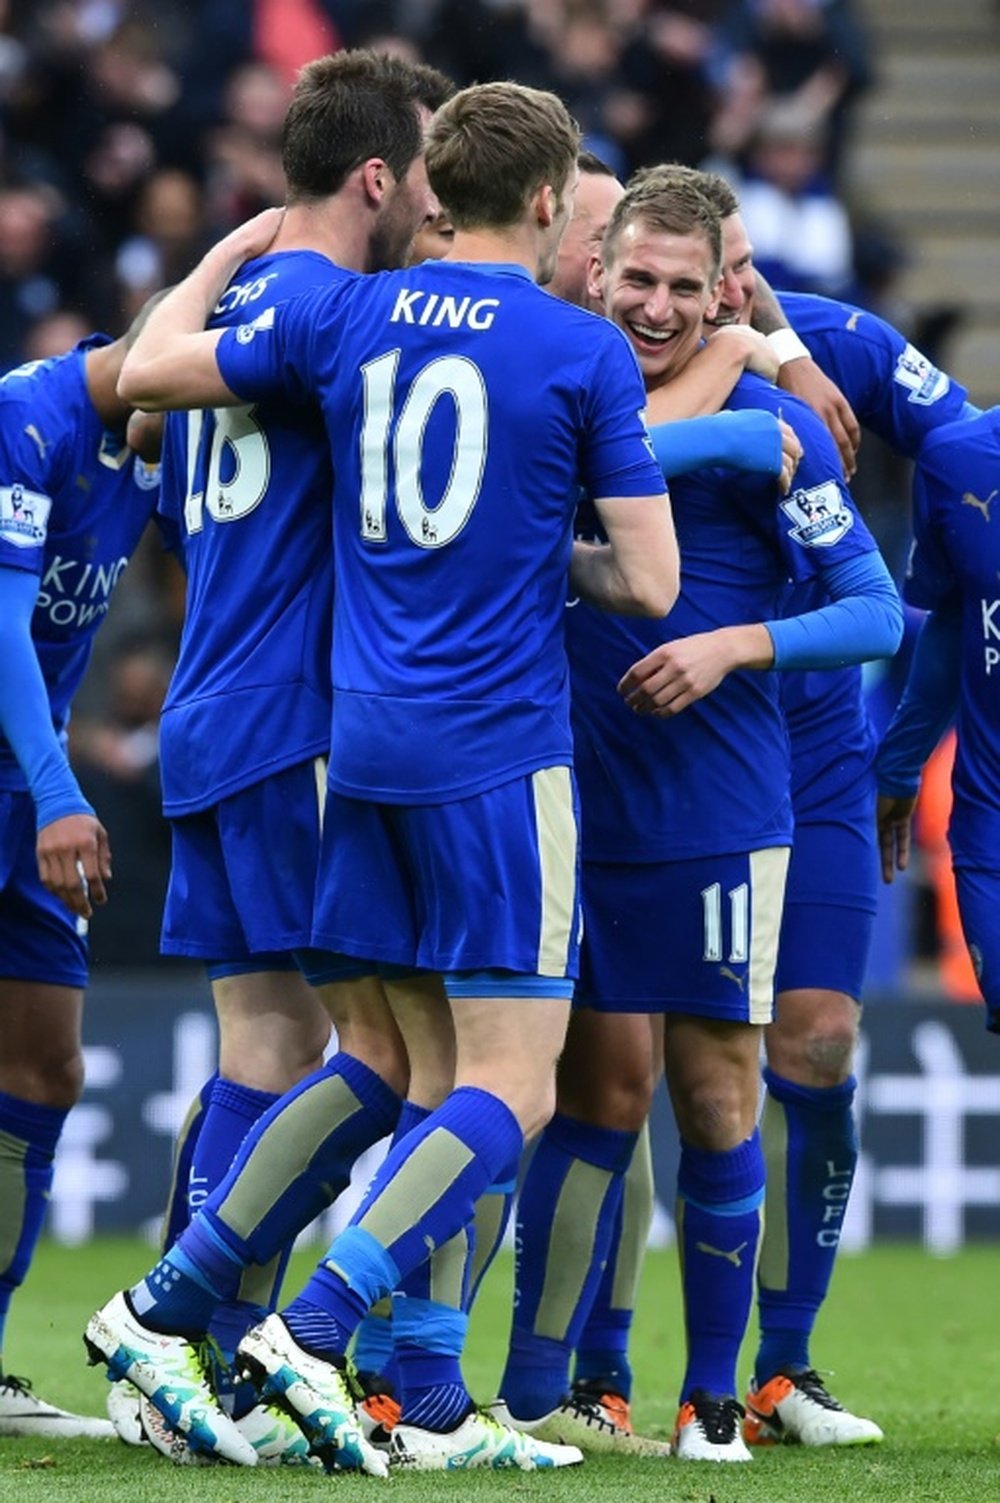 Leicester are on the cusp of a fairytale win. BeSoccer